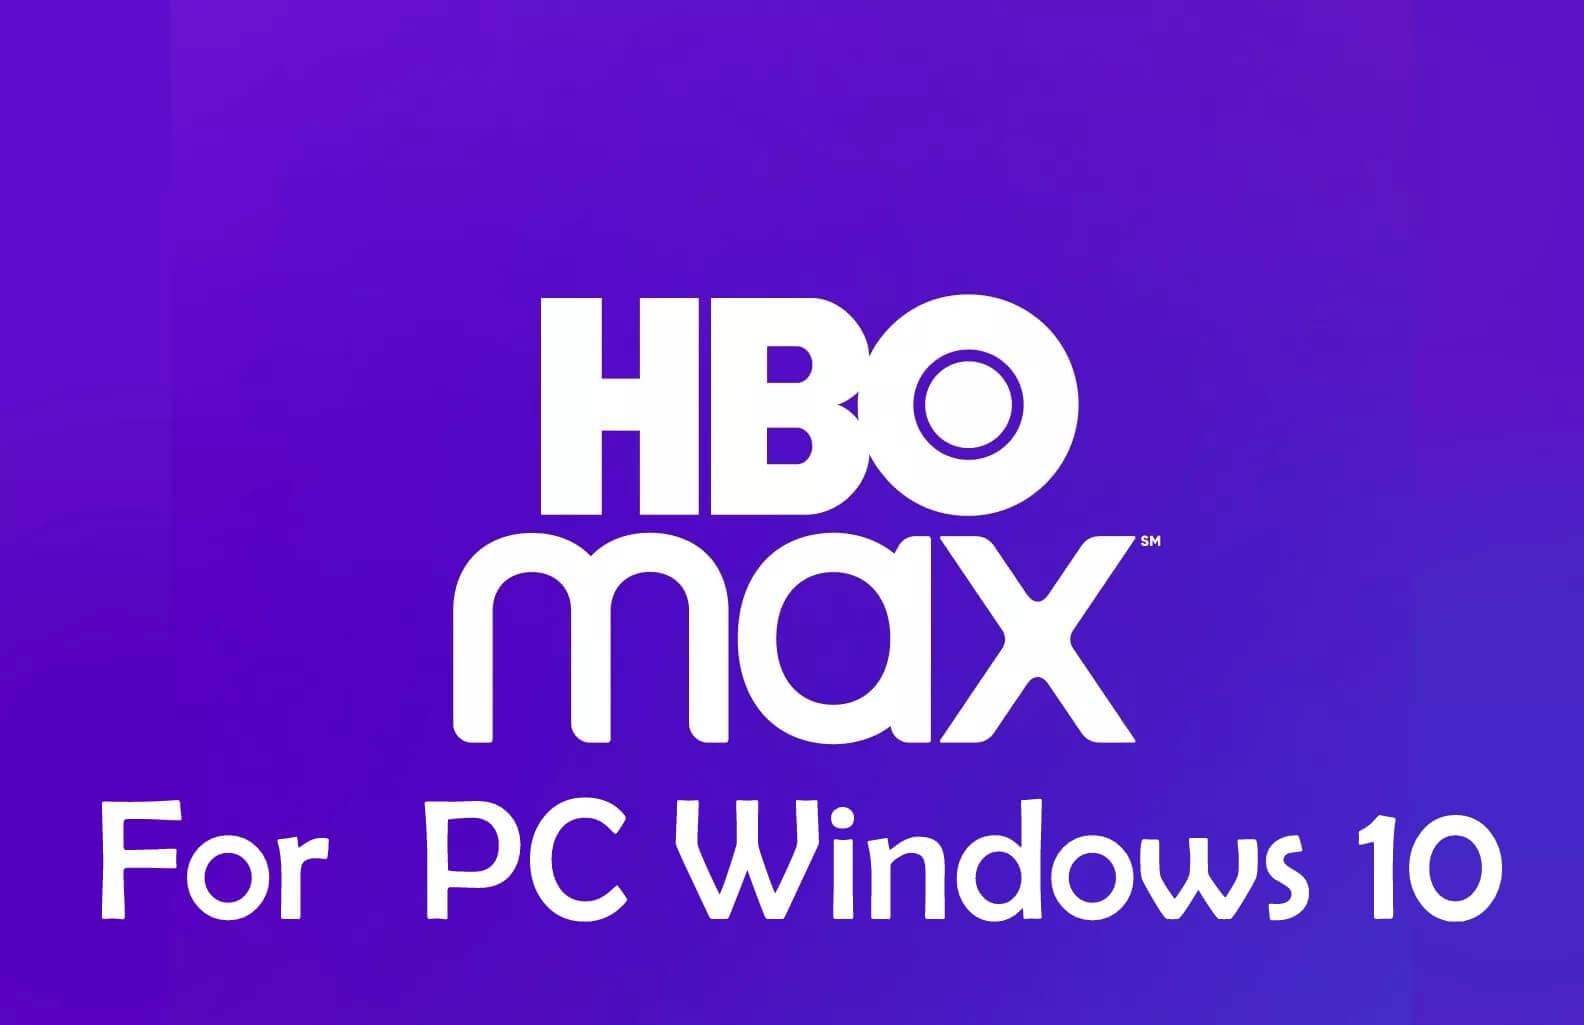 Download HBO Max for PC Windows 10 & Mac right now. AxeeTech